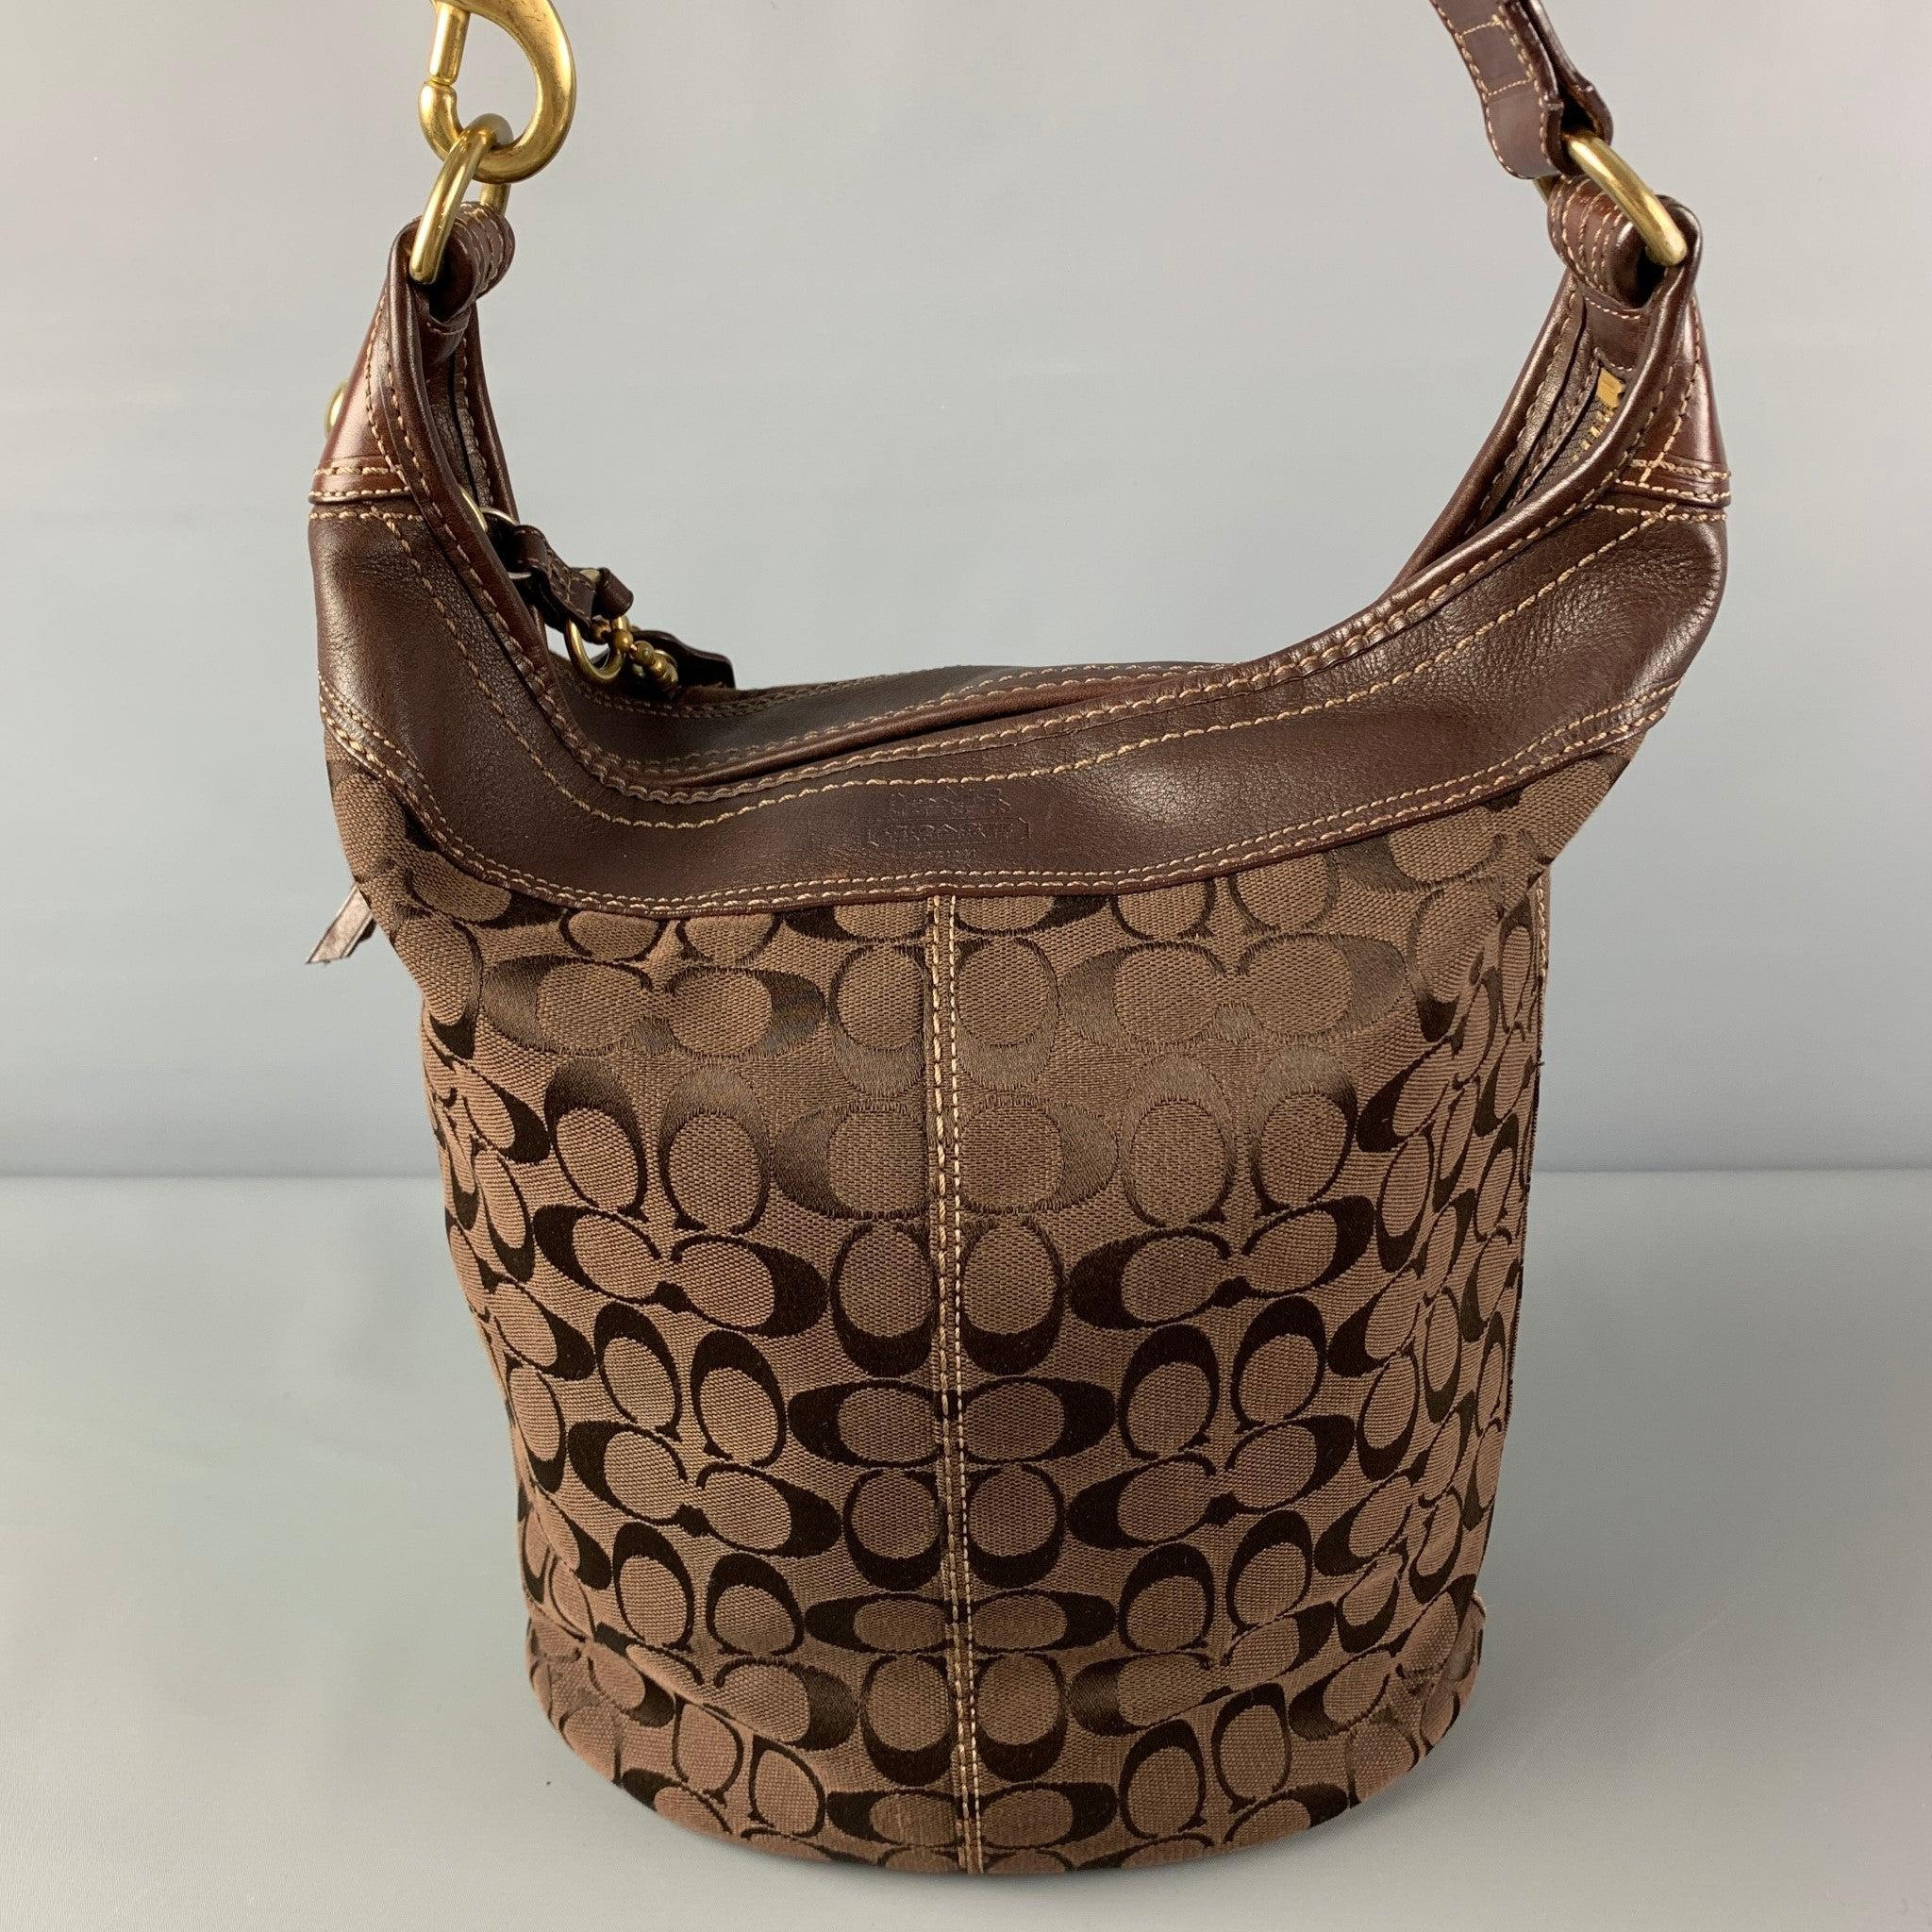 COACH Brown Monogram Canvas Leather Trim Shoulder Bag In Good Condition For Sale In San Francisco, CA